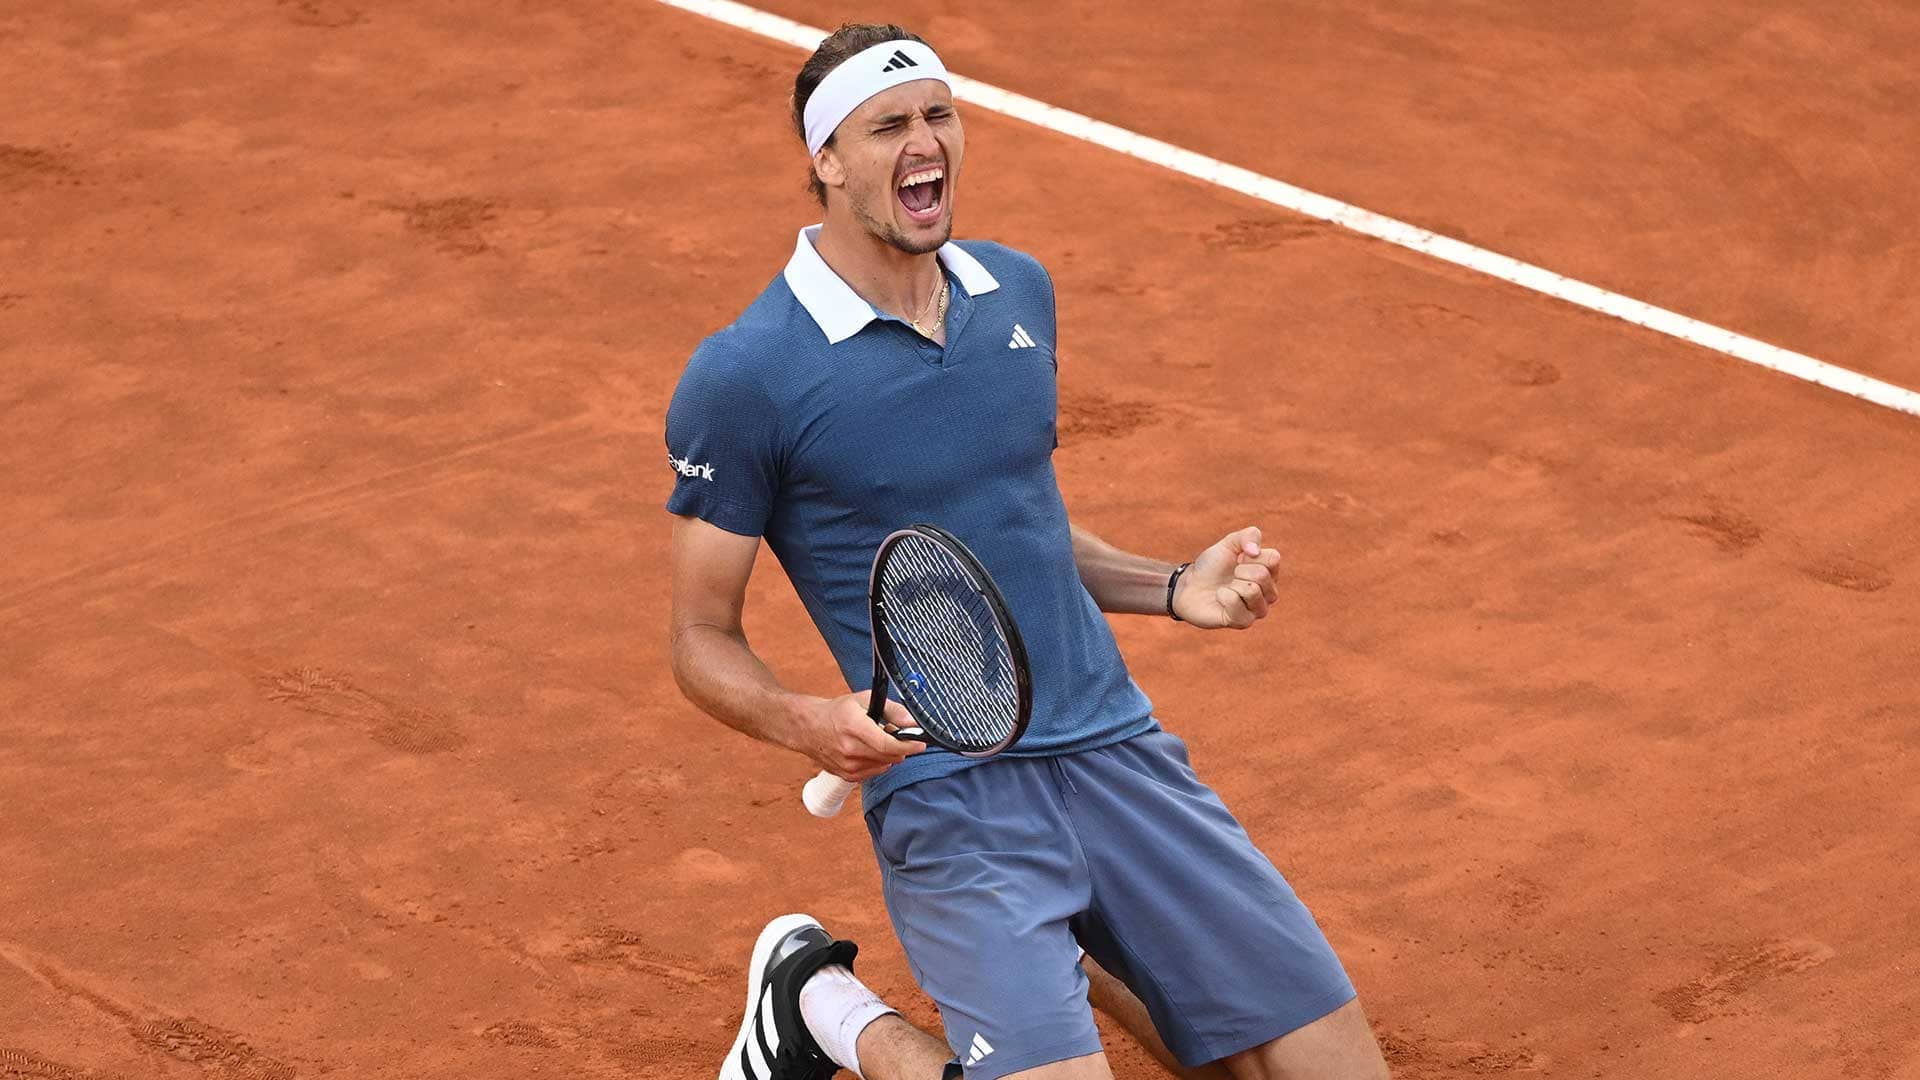 Zverev clinches sixth Masters 1000 crown in Rome